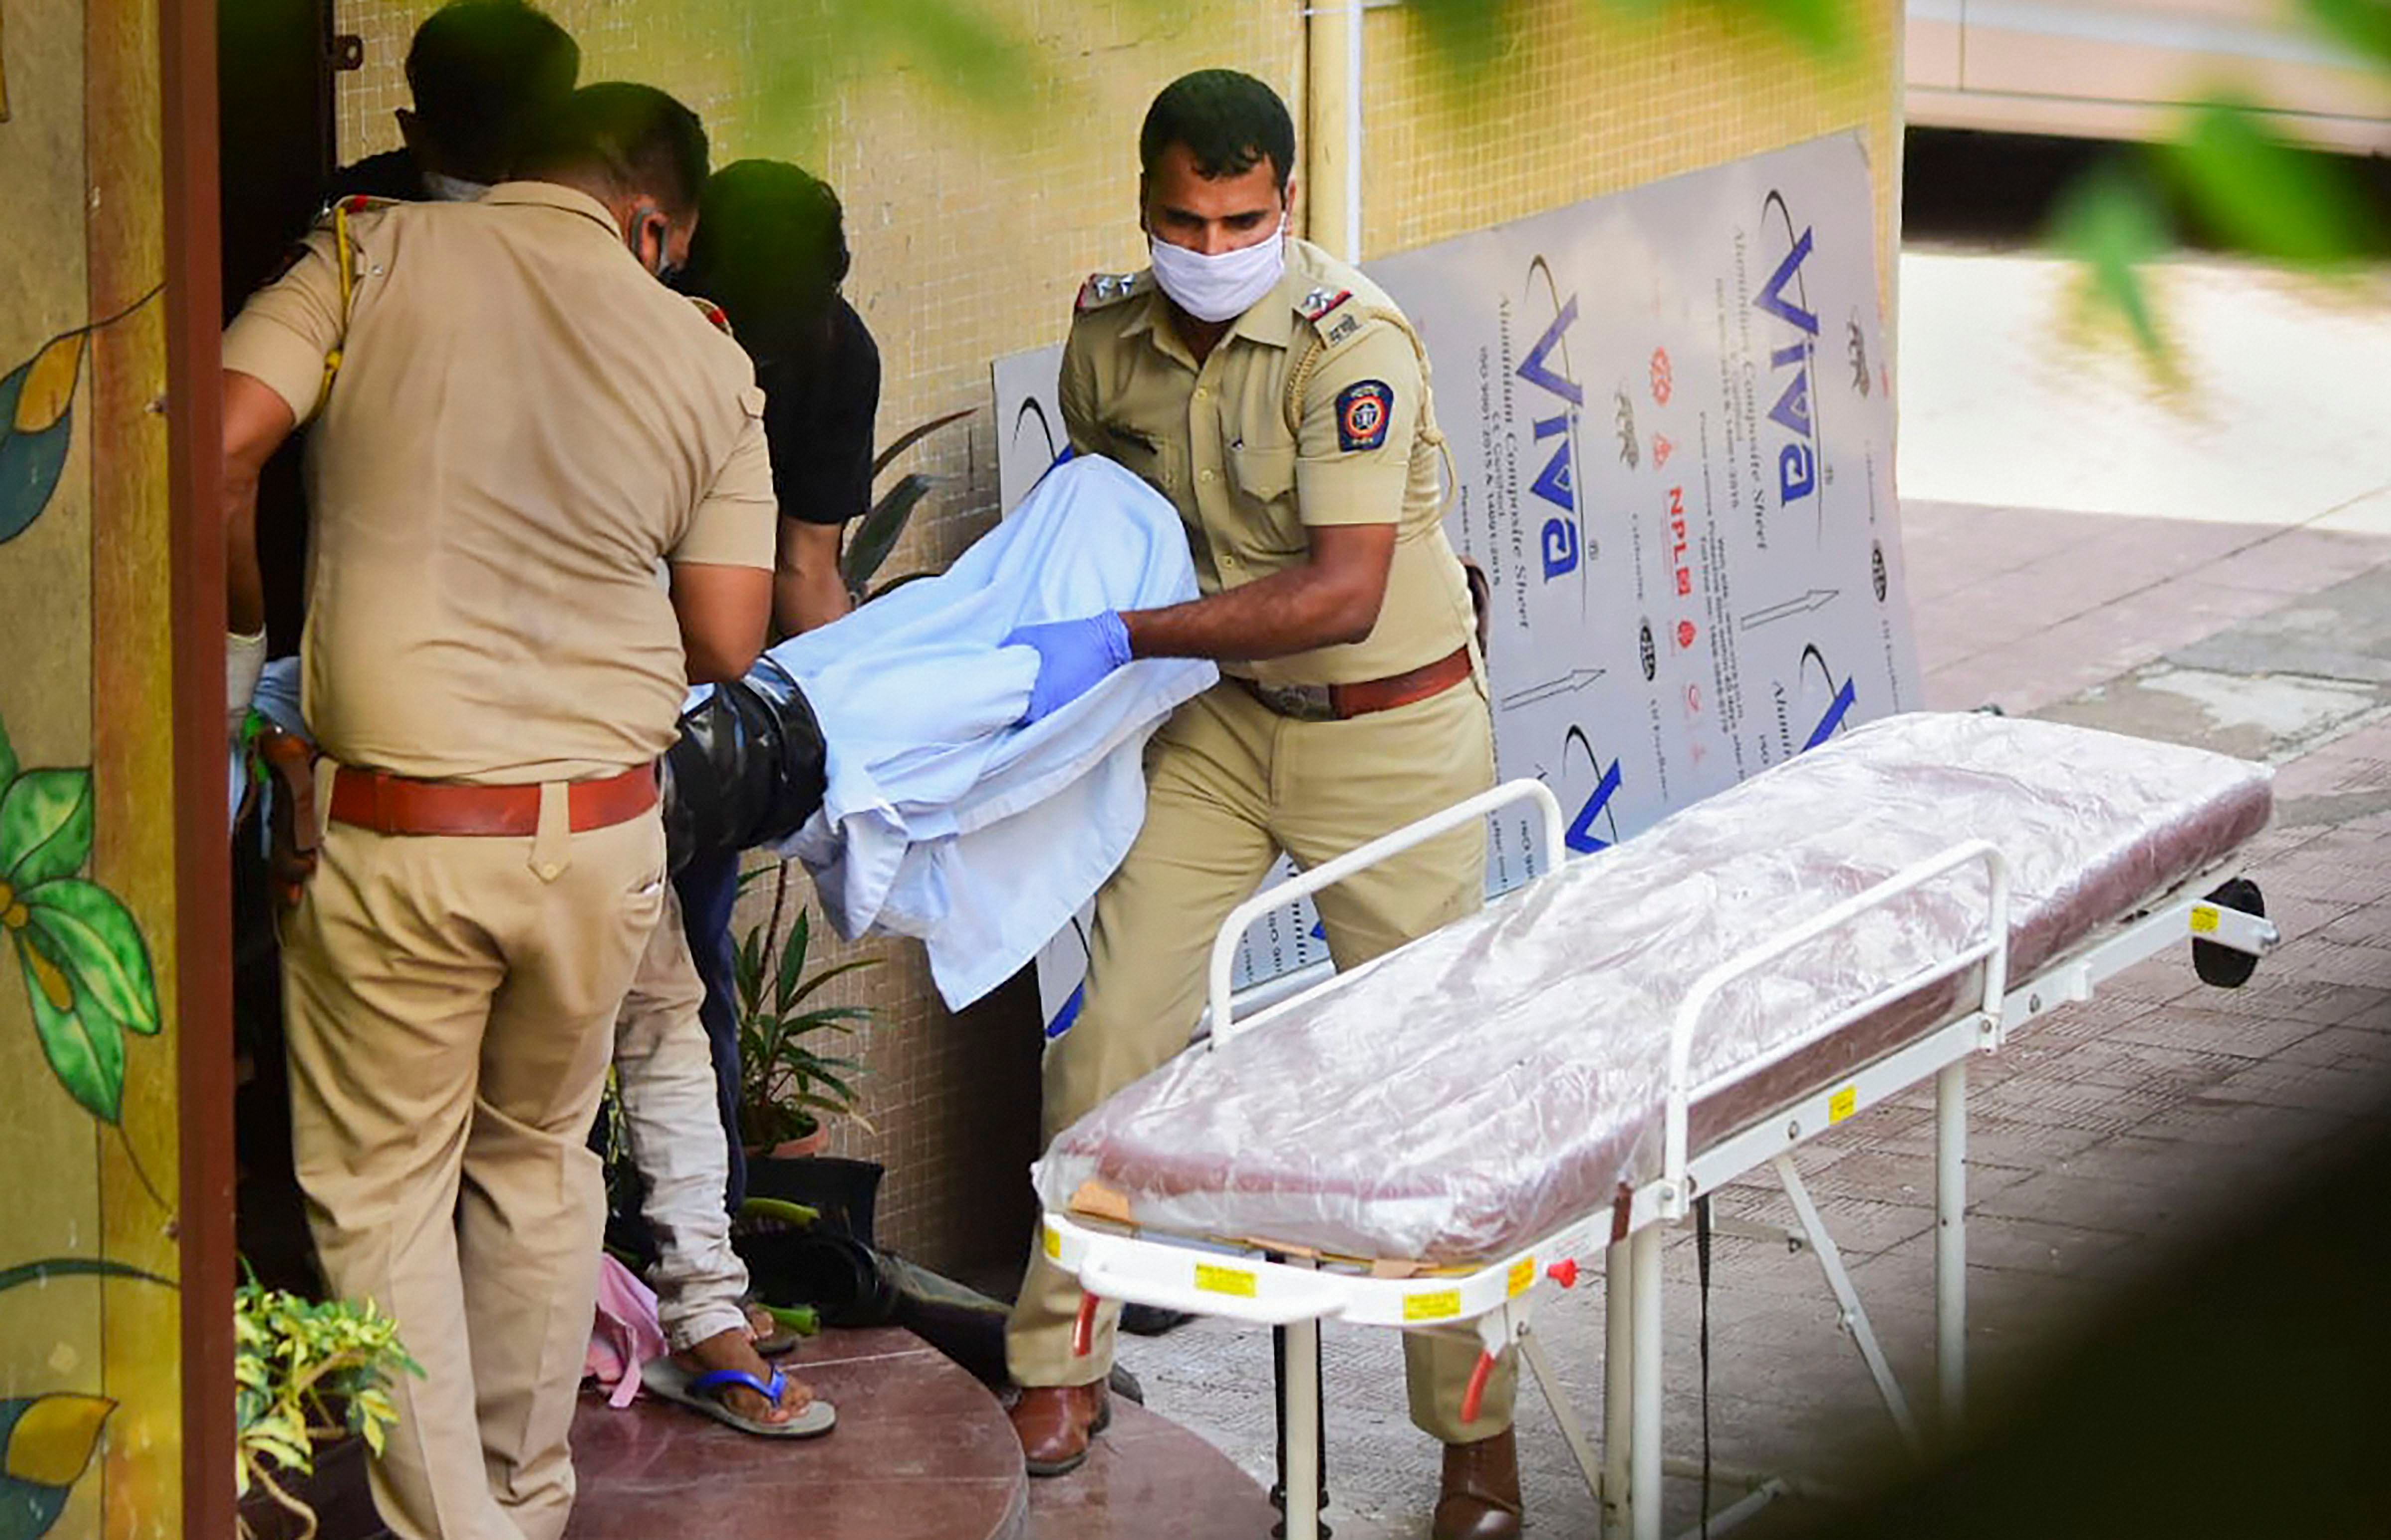 Police personnel take the body of Bollywood actor Sushant Singh Rajput towards an ambulance after he was found hanging at his apartment, in Mumbai. Credits: PTI Photo